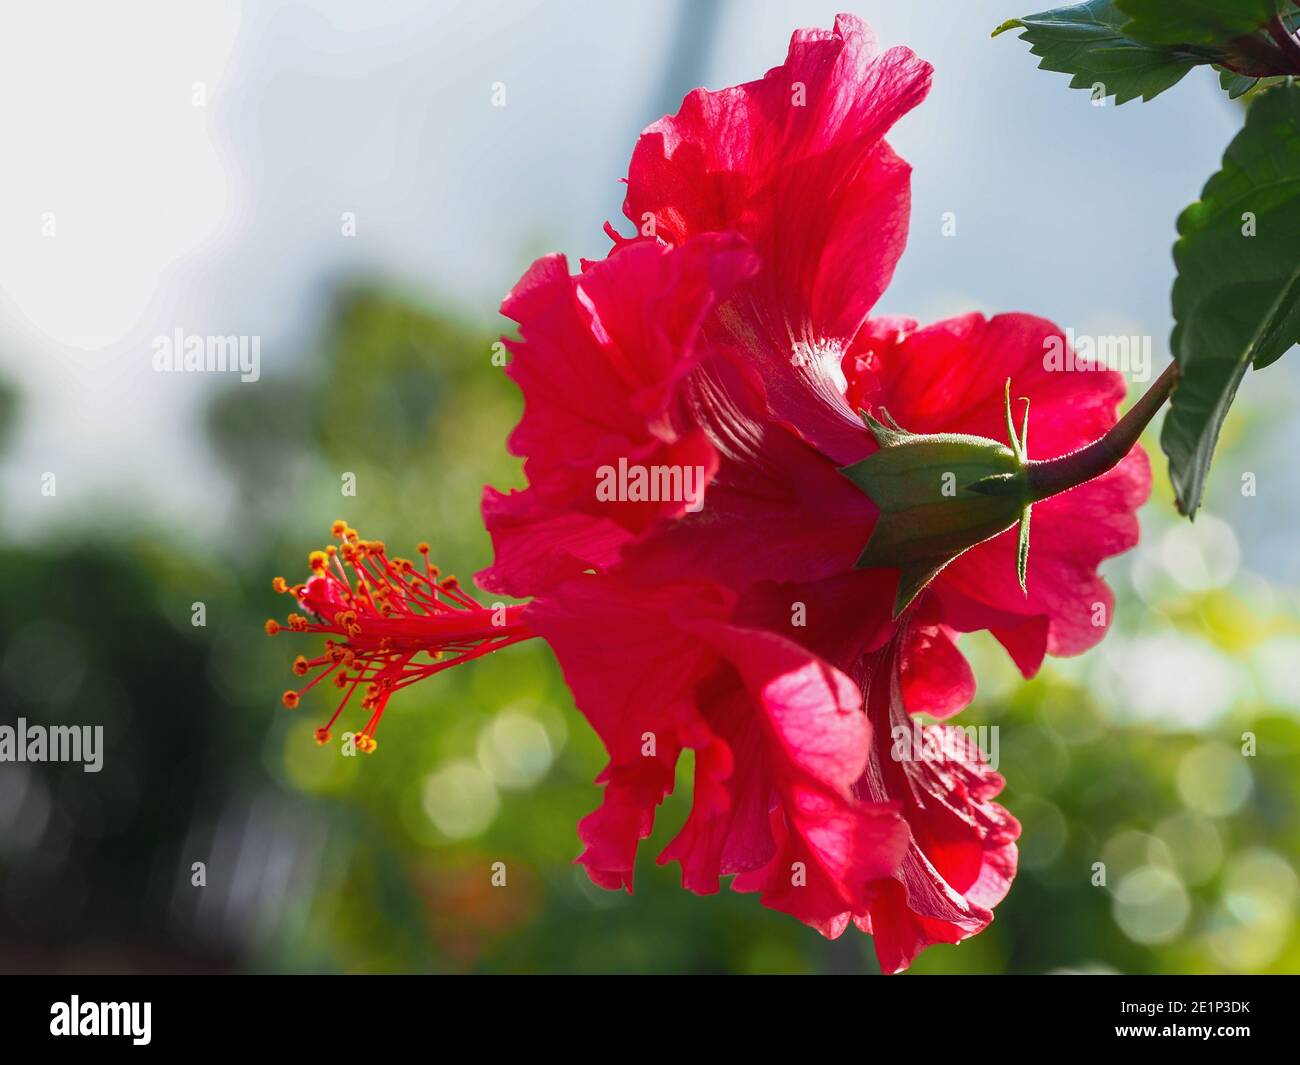 A Bright Crimson Red pink double Hibiscus plant Flower, 'Hiawatha', colour glowing vibrantly,  in bloom, Summer, blurred coastal Garden background Stock Photo